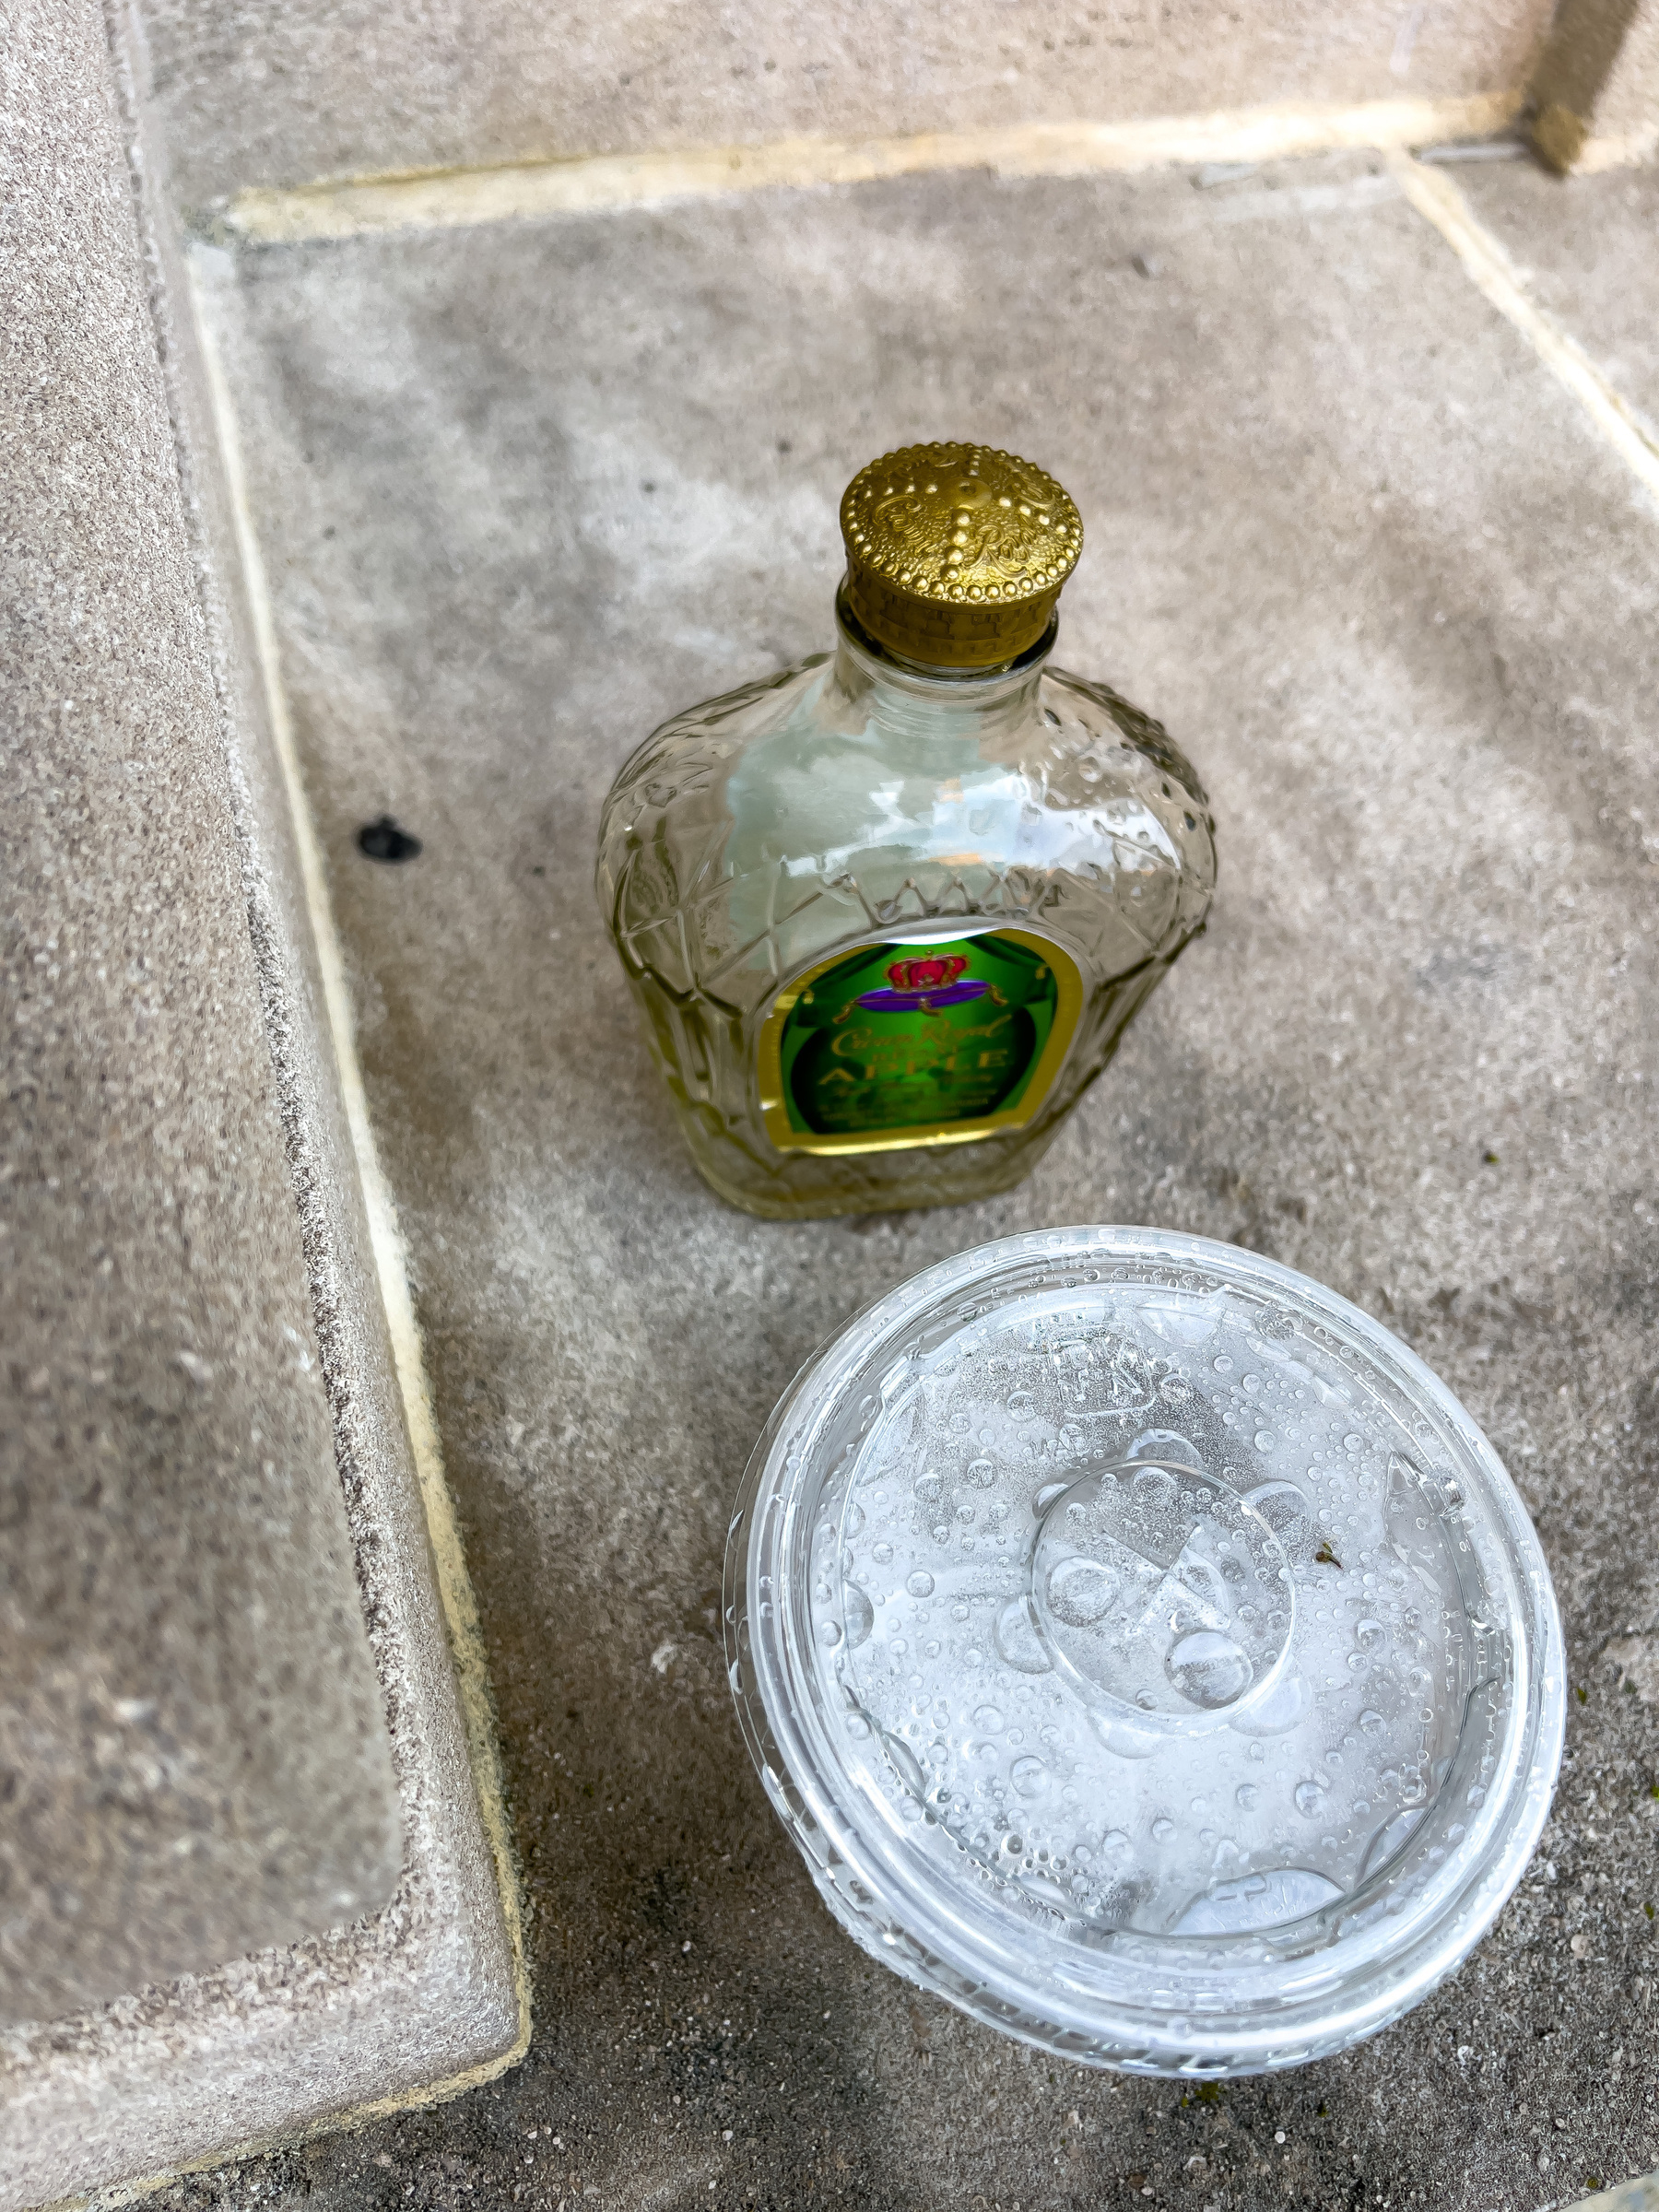 Plastic takeout cup and empty brandy bottle on stone ledge.